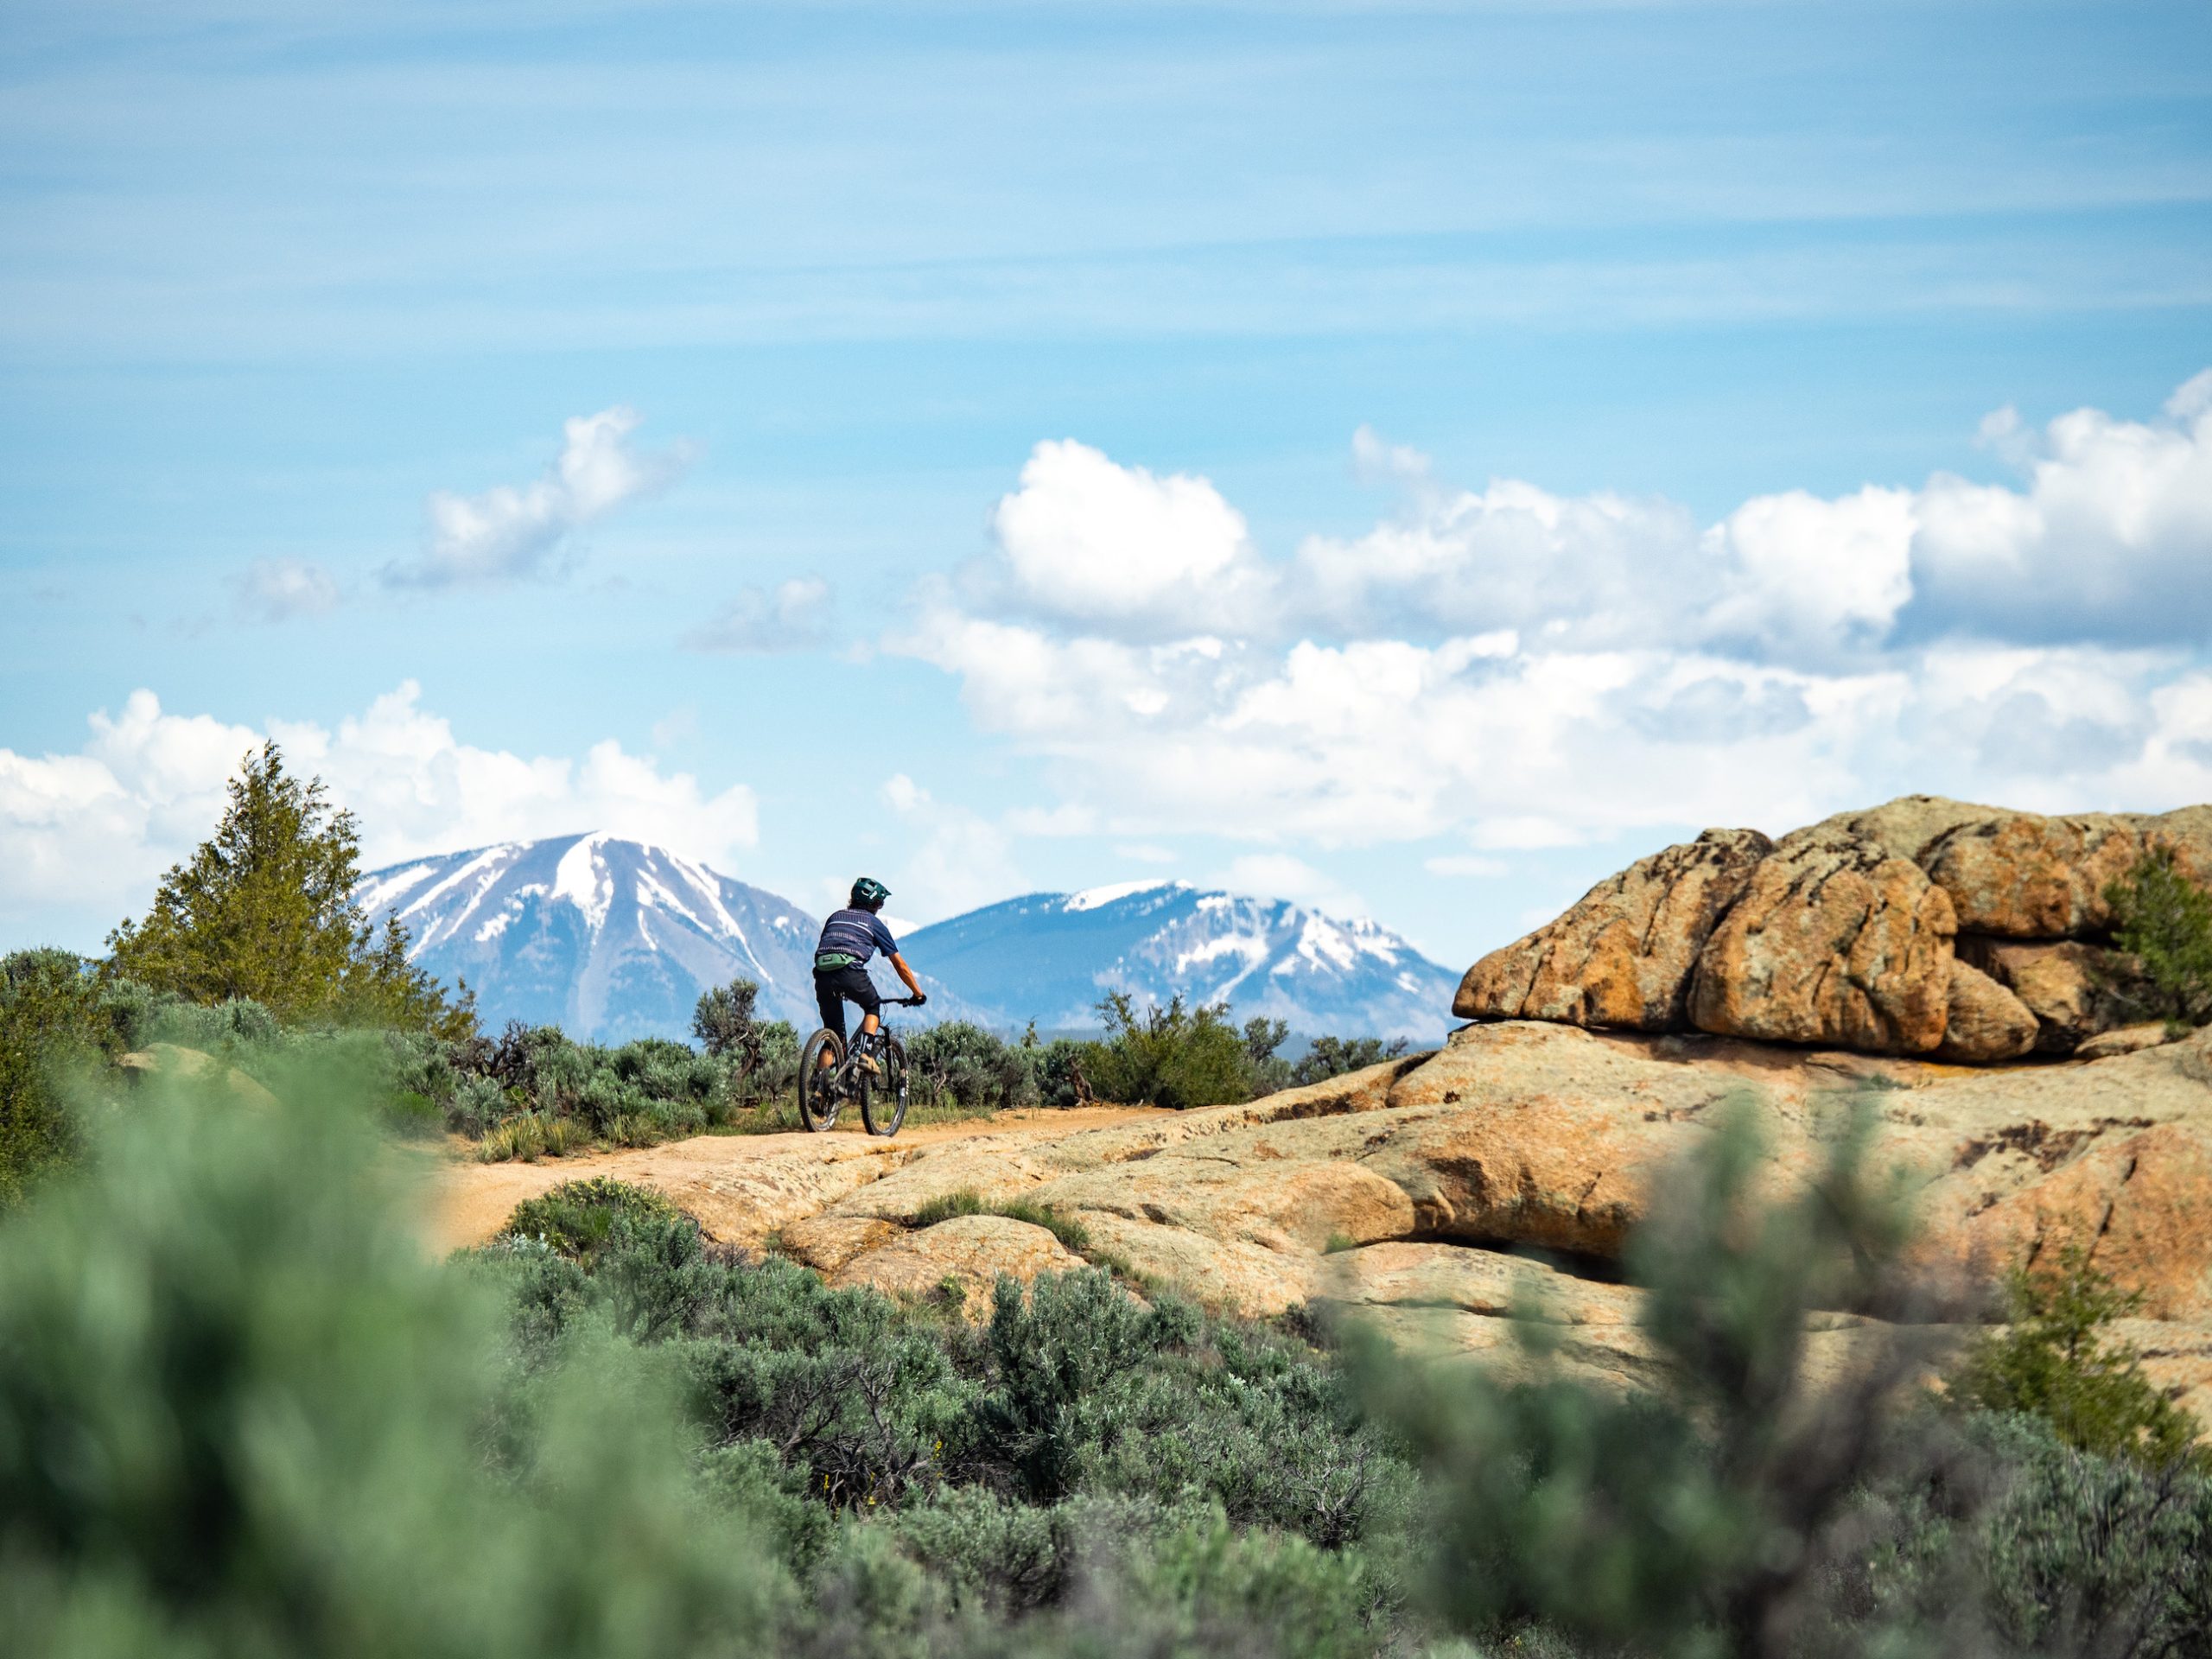 A mountain biker on a rocky trail with snow-capped peaks in the background